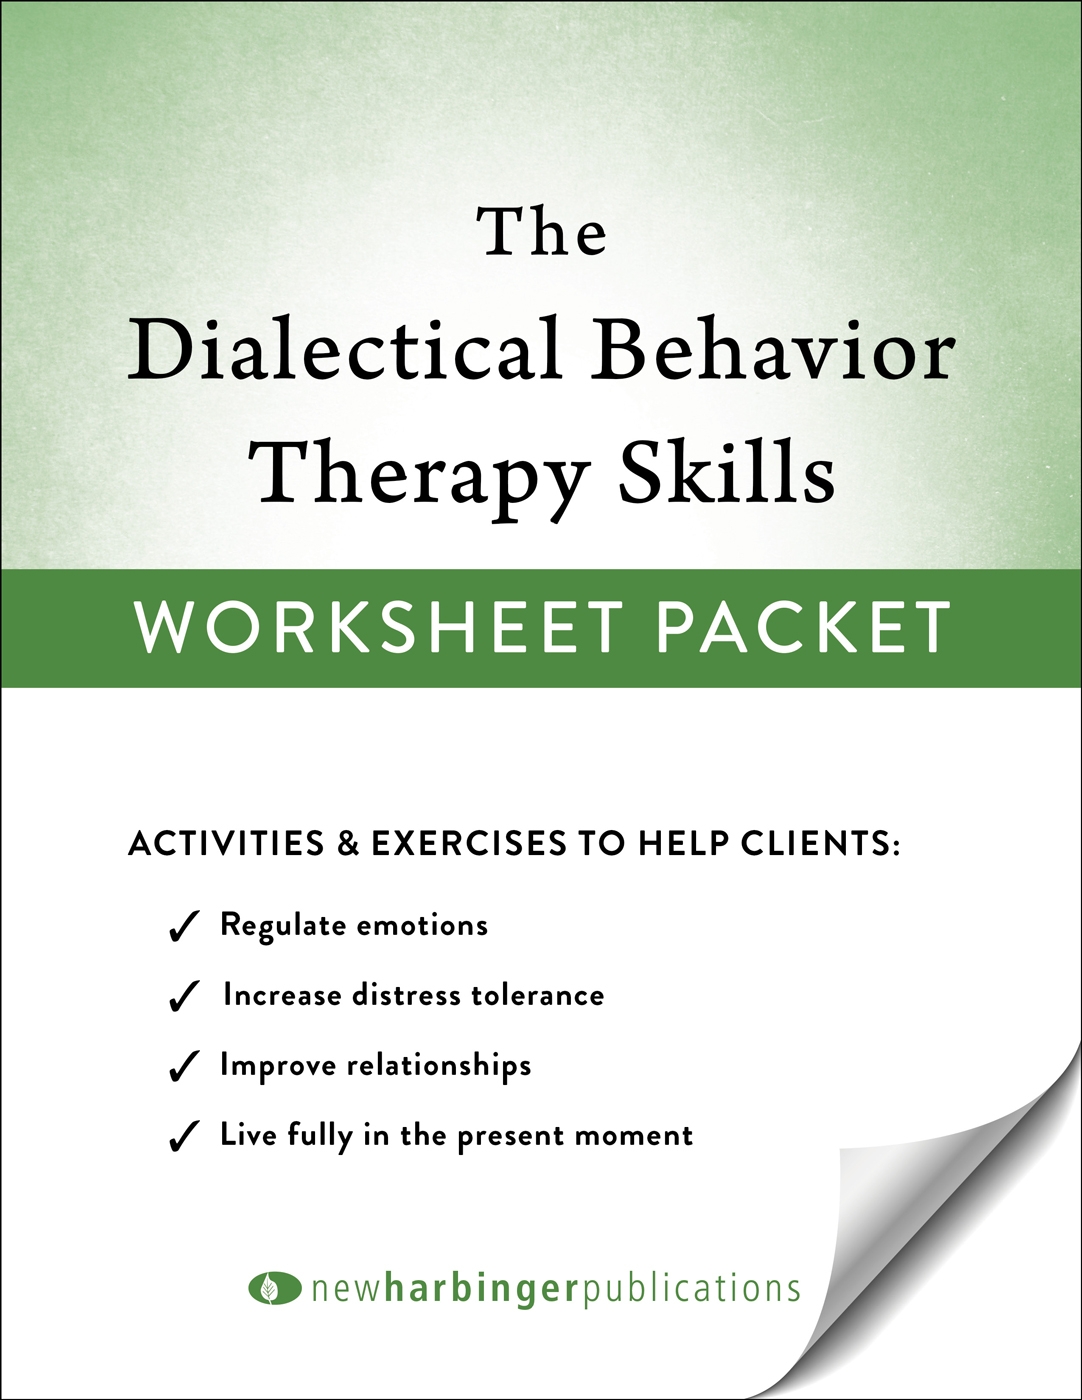 What Is Dbt Therapy Worksheet